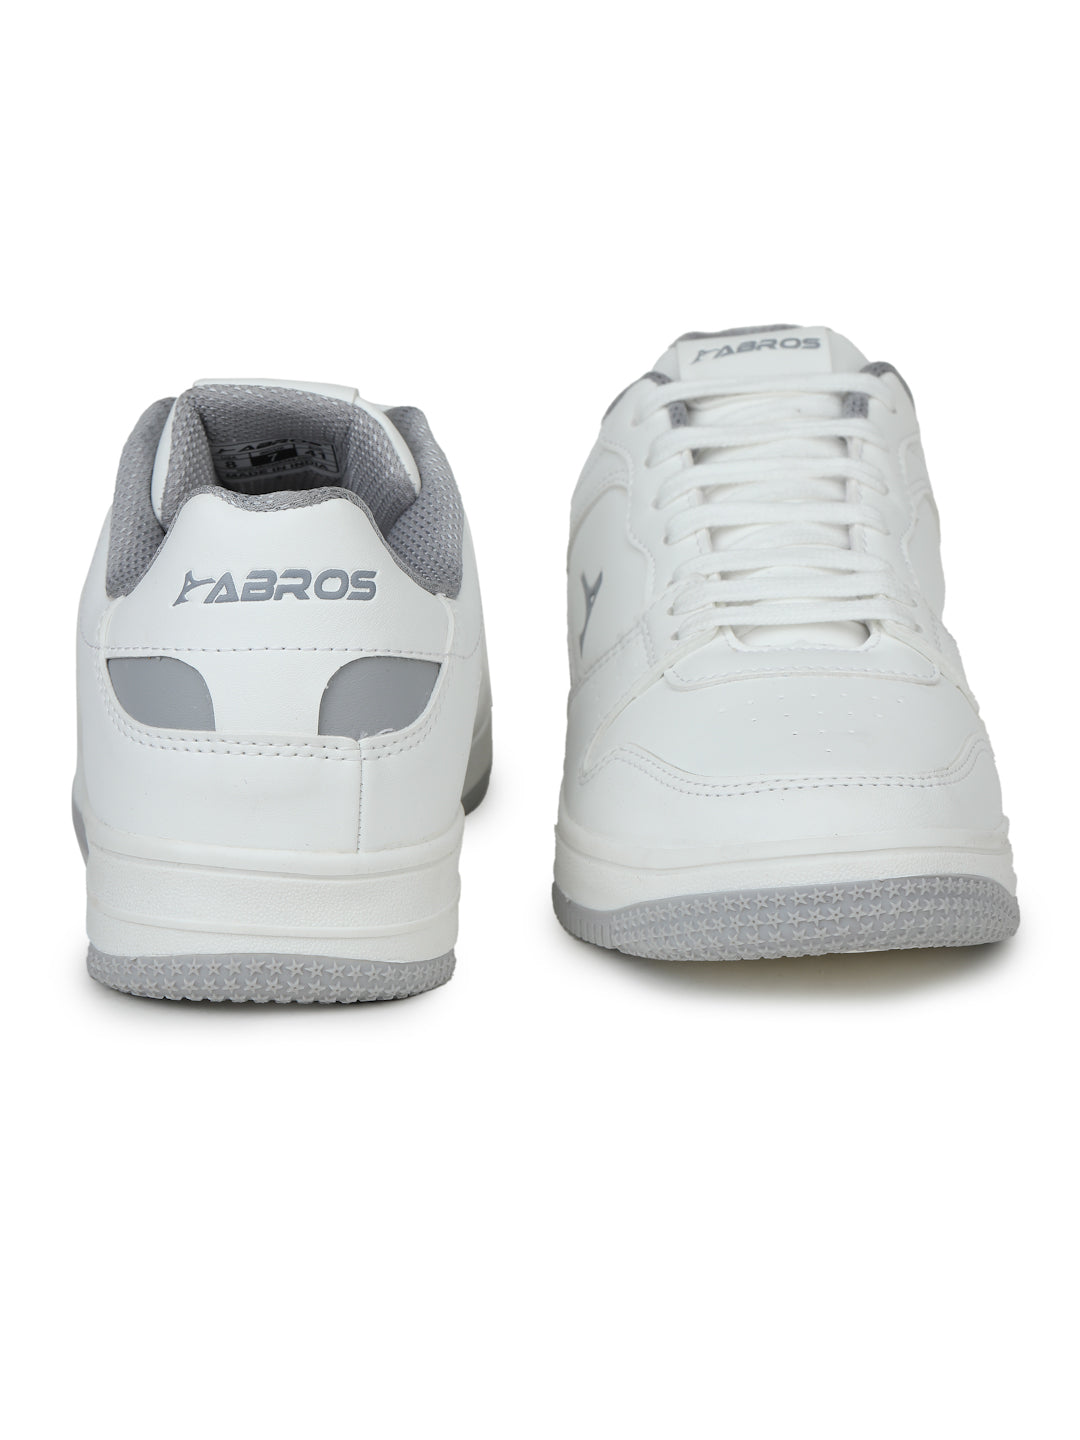 ABROS Casual Sneakers Algo8016 Jacob Lifestyle Shoes For Men